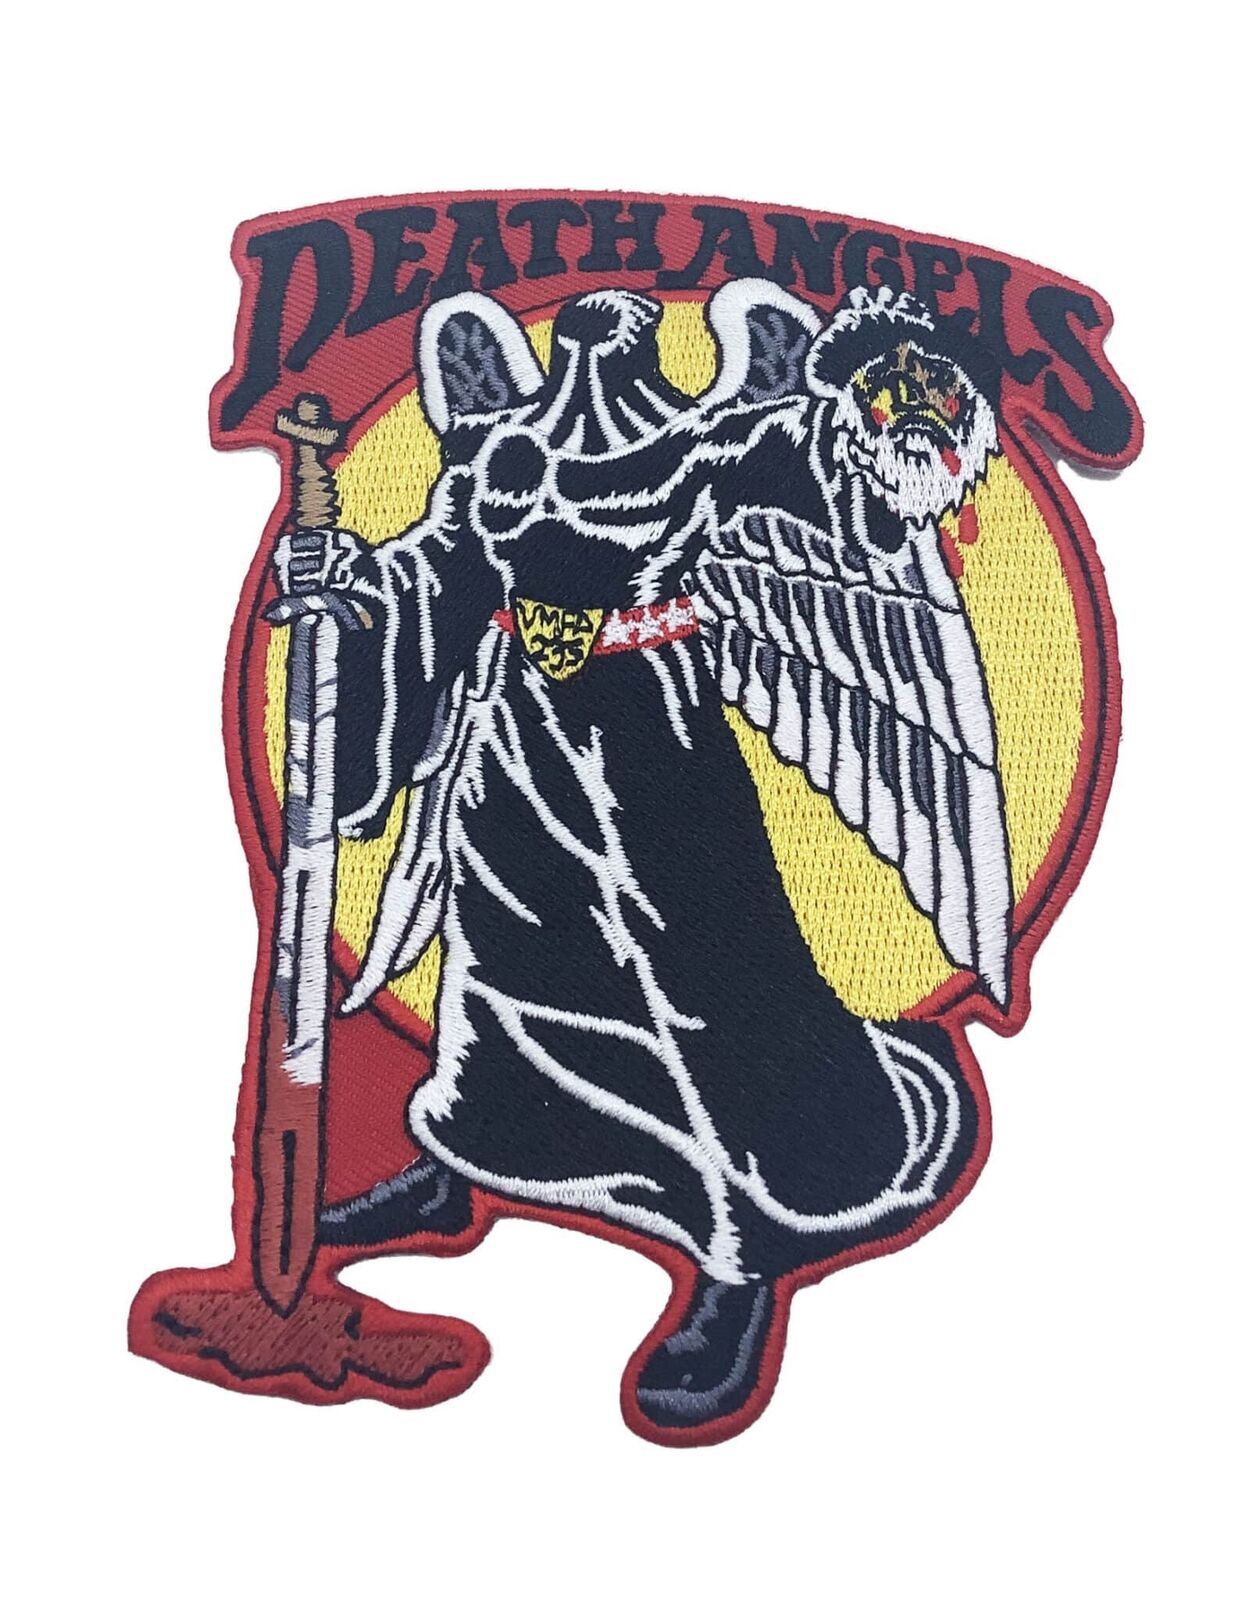 VMFA-235 Death Angels 1979 Squadron Patch – Plastic Backing